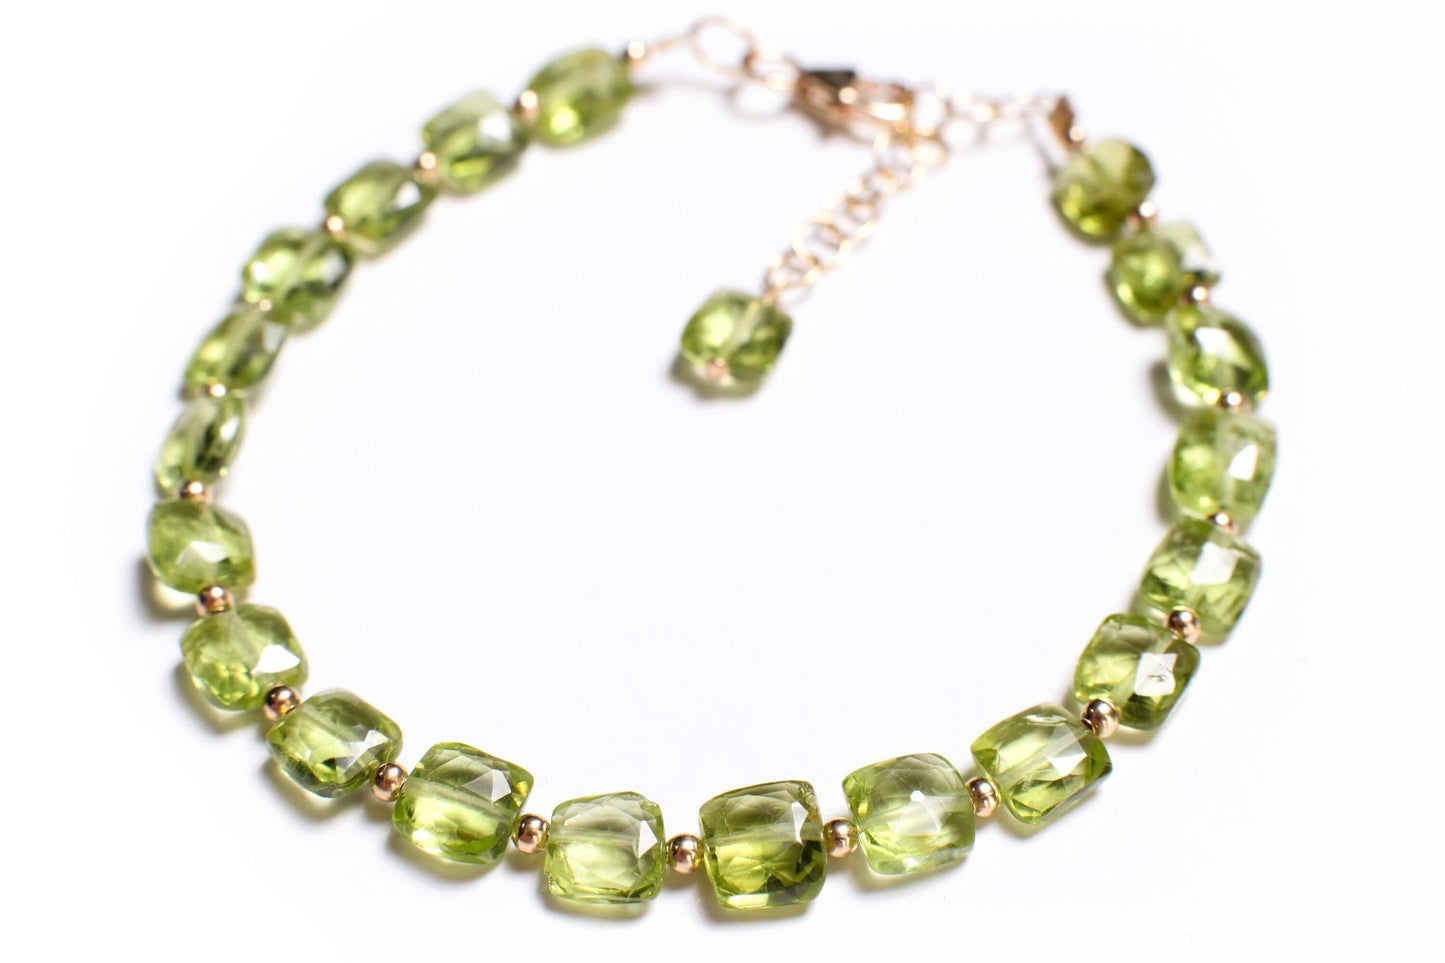 Peridot Faceted 5mm Cushion Shape Gemstone Bracelet in 14K Gold Filled Chain and Clasp, 14k gf 2mm spacer , Elegant Gift , August birthstone